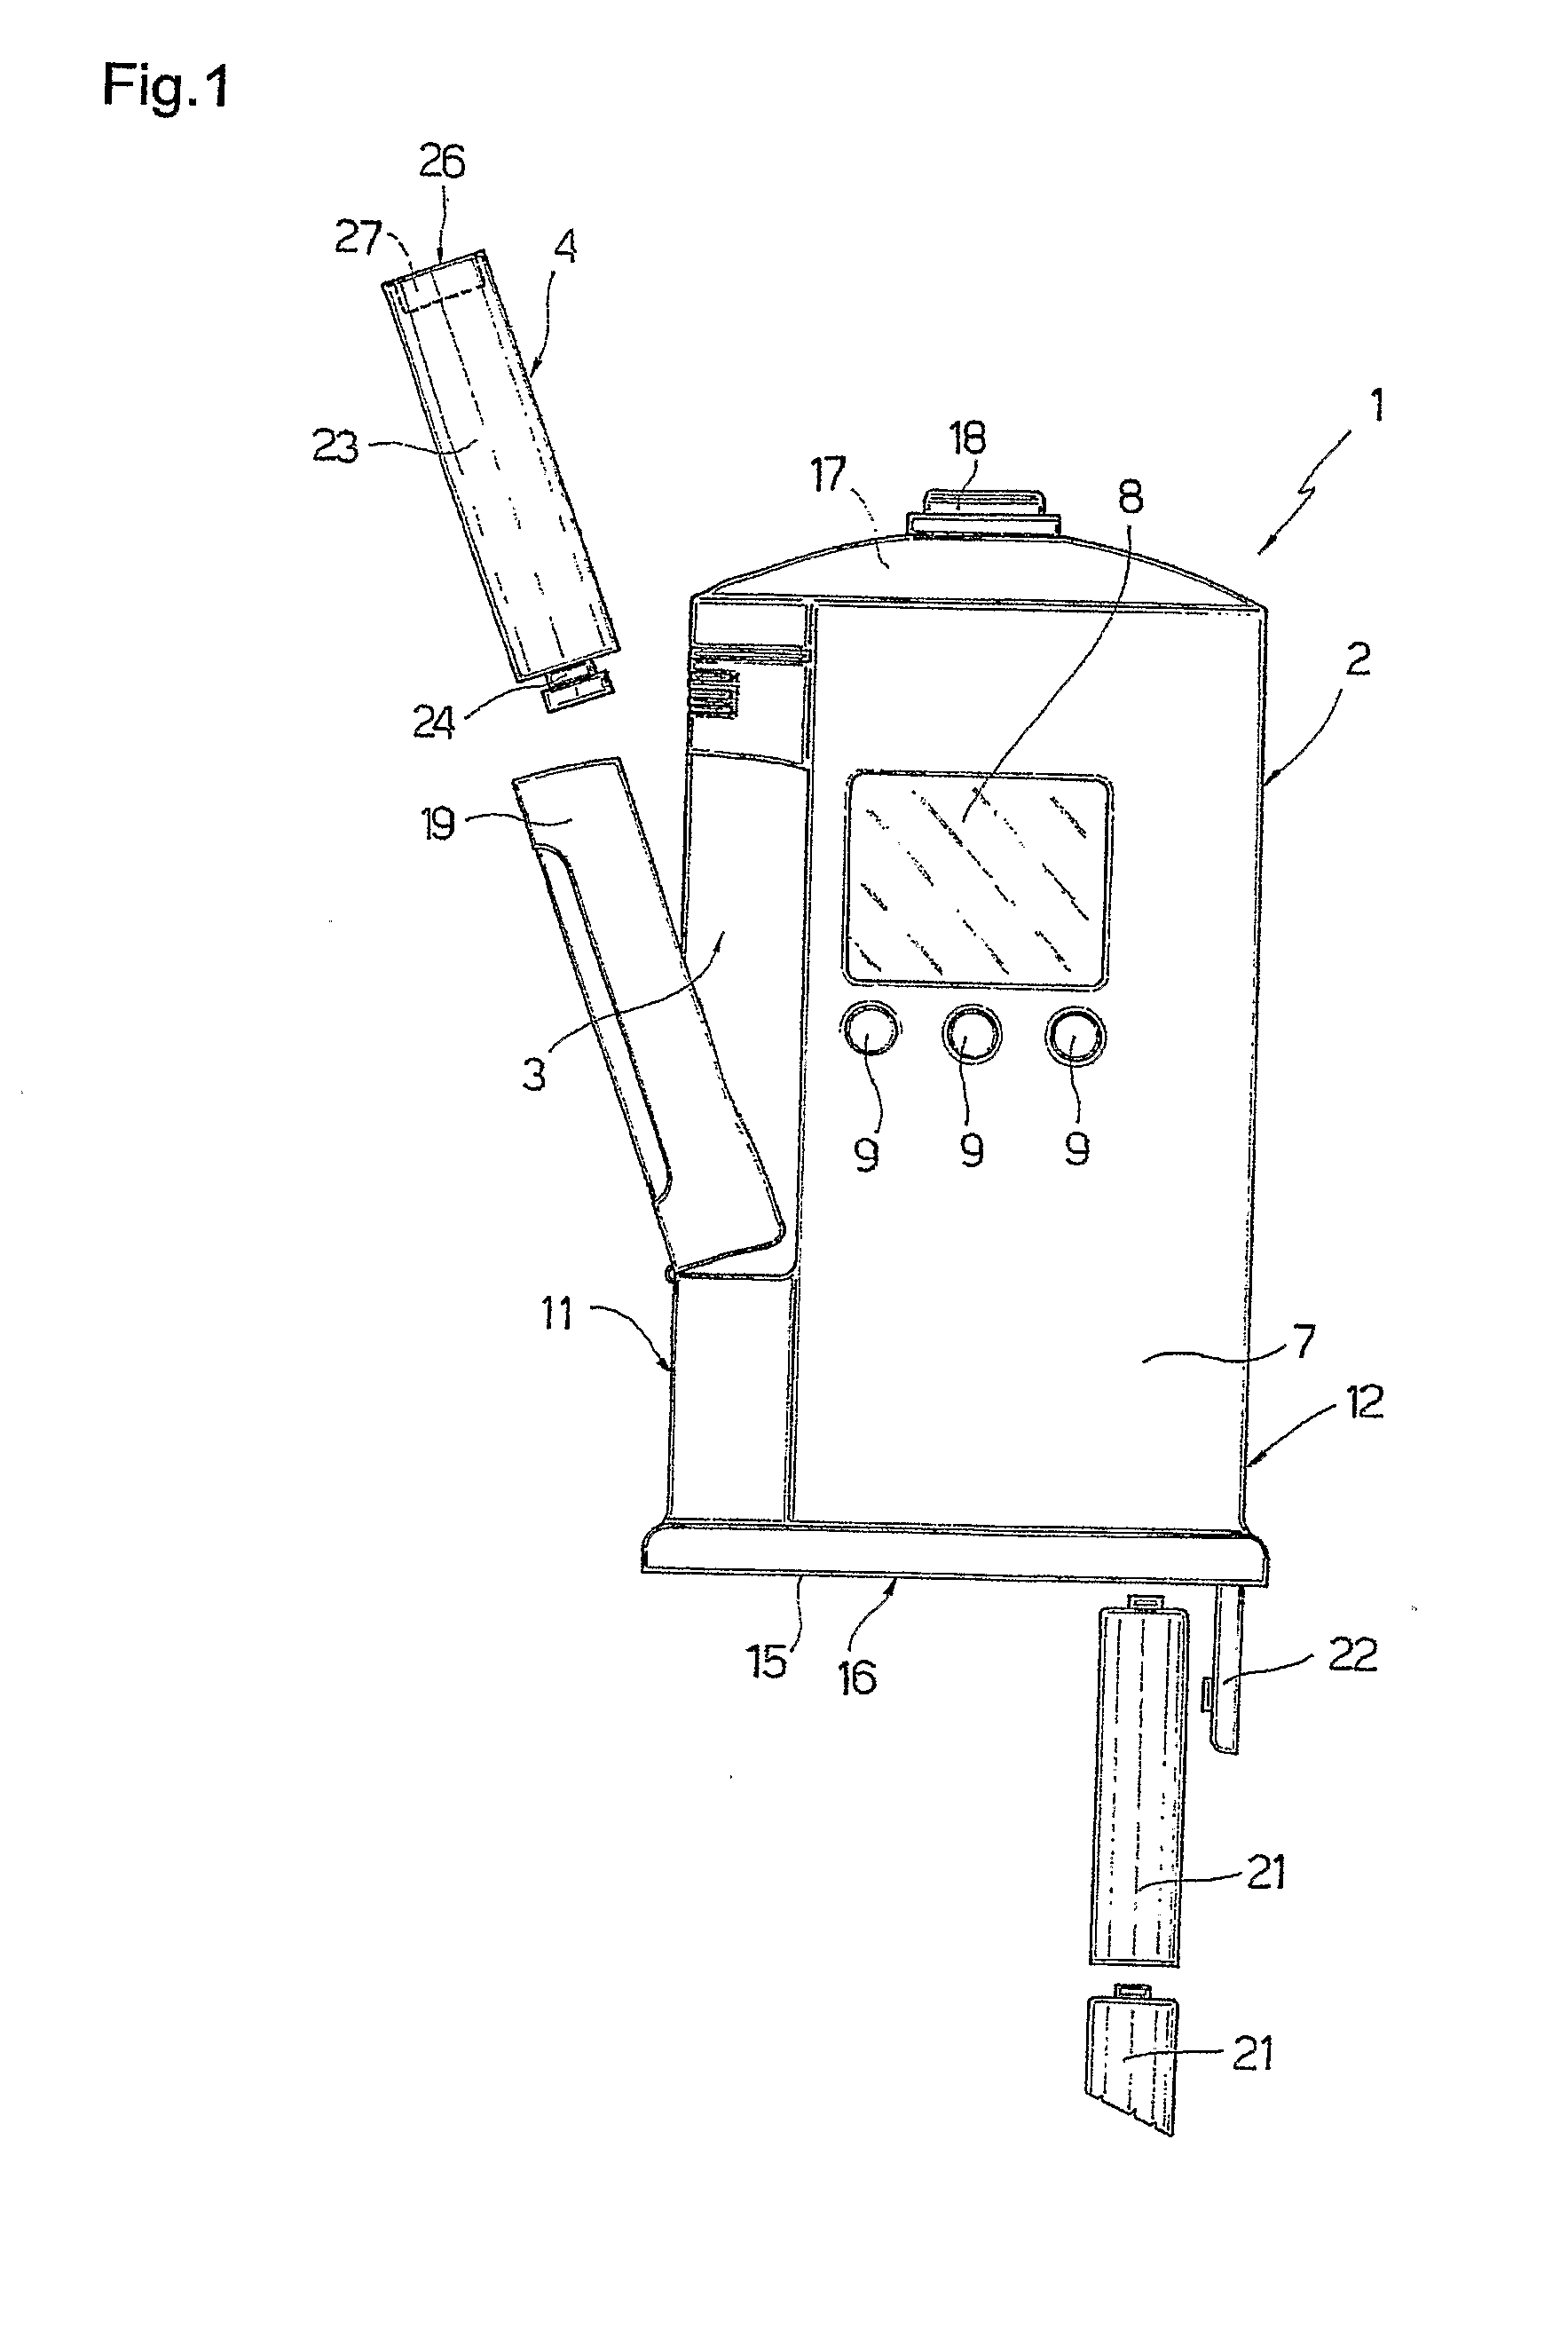 Hand-held electronically controlled injection device for injecting liquid medications